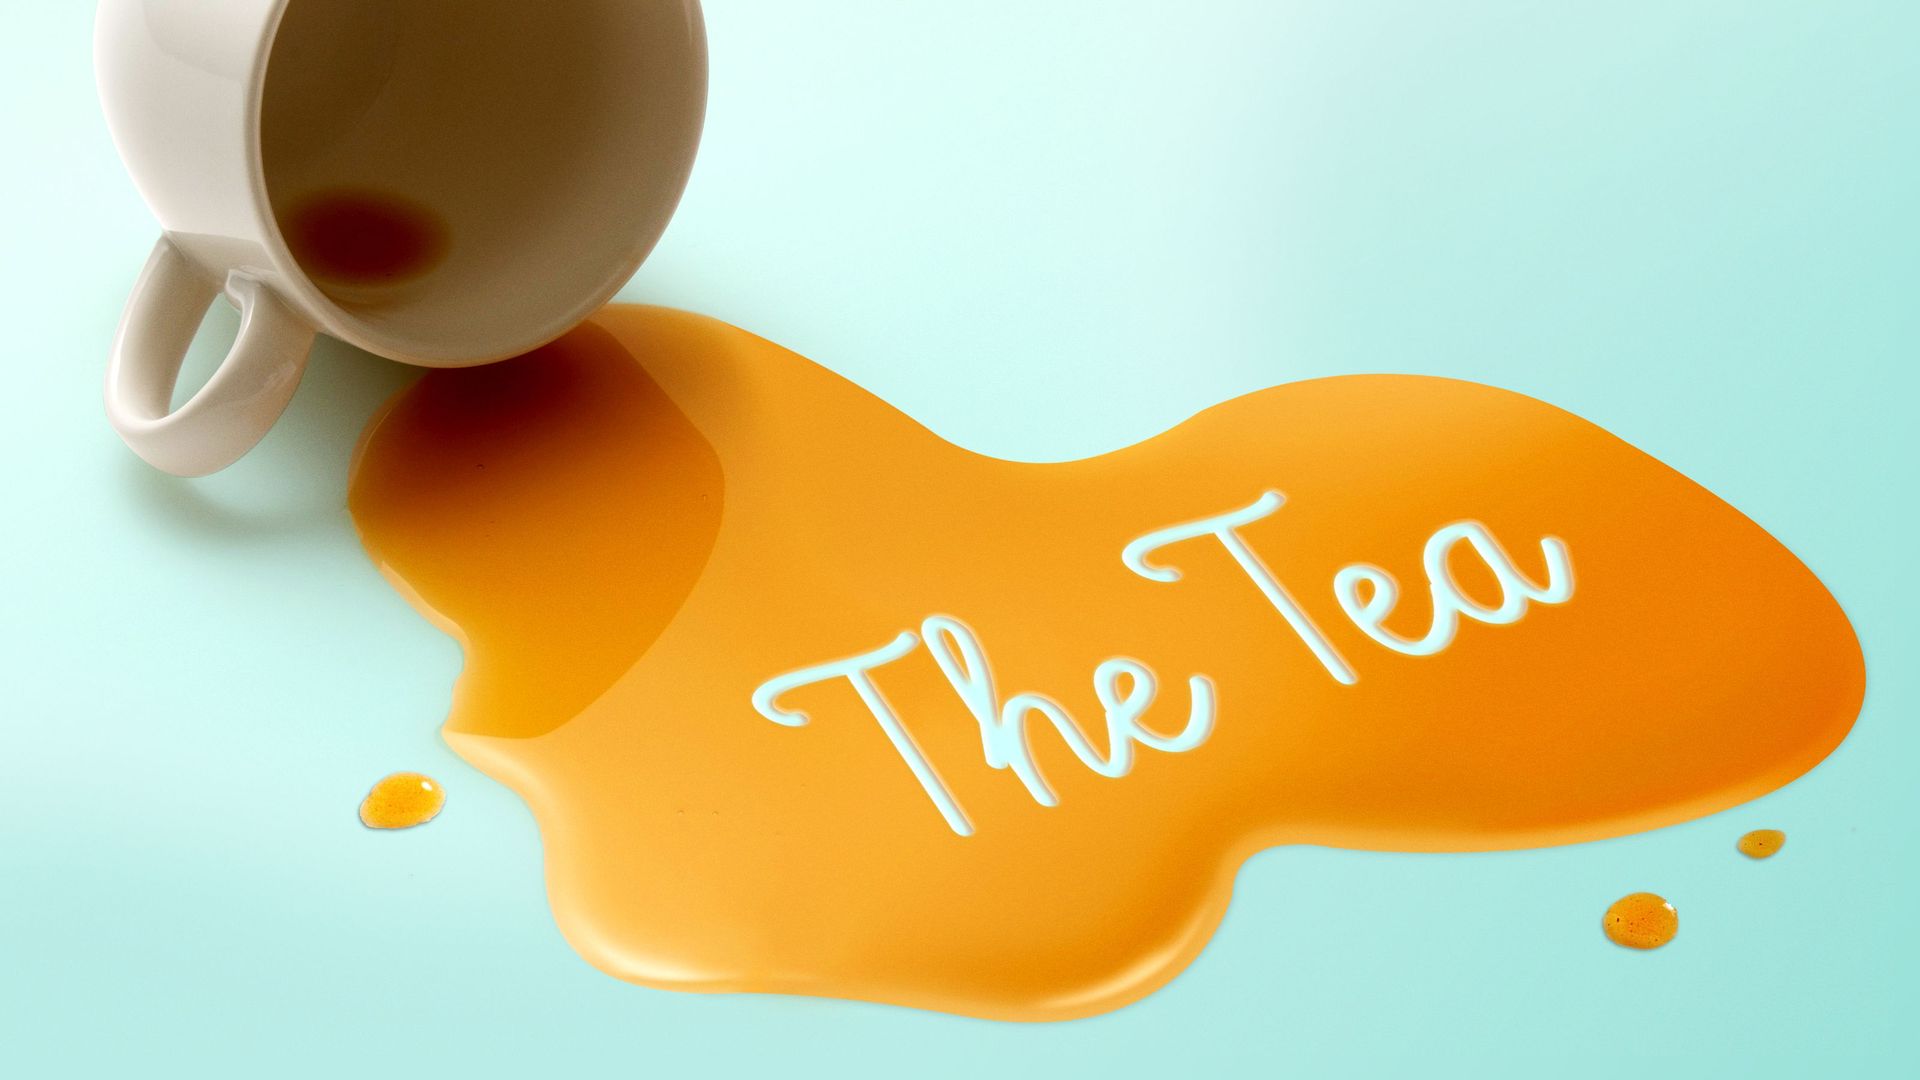 Illustration of a spilled teacup with tea spilling out, and "The Tea" written in the the spilled liquid.